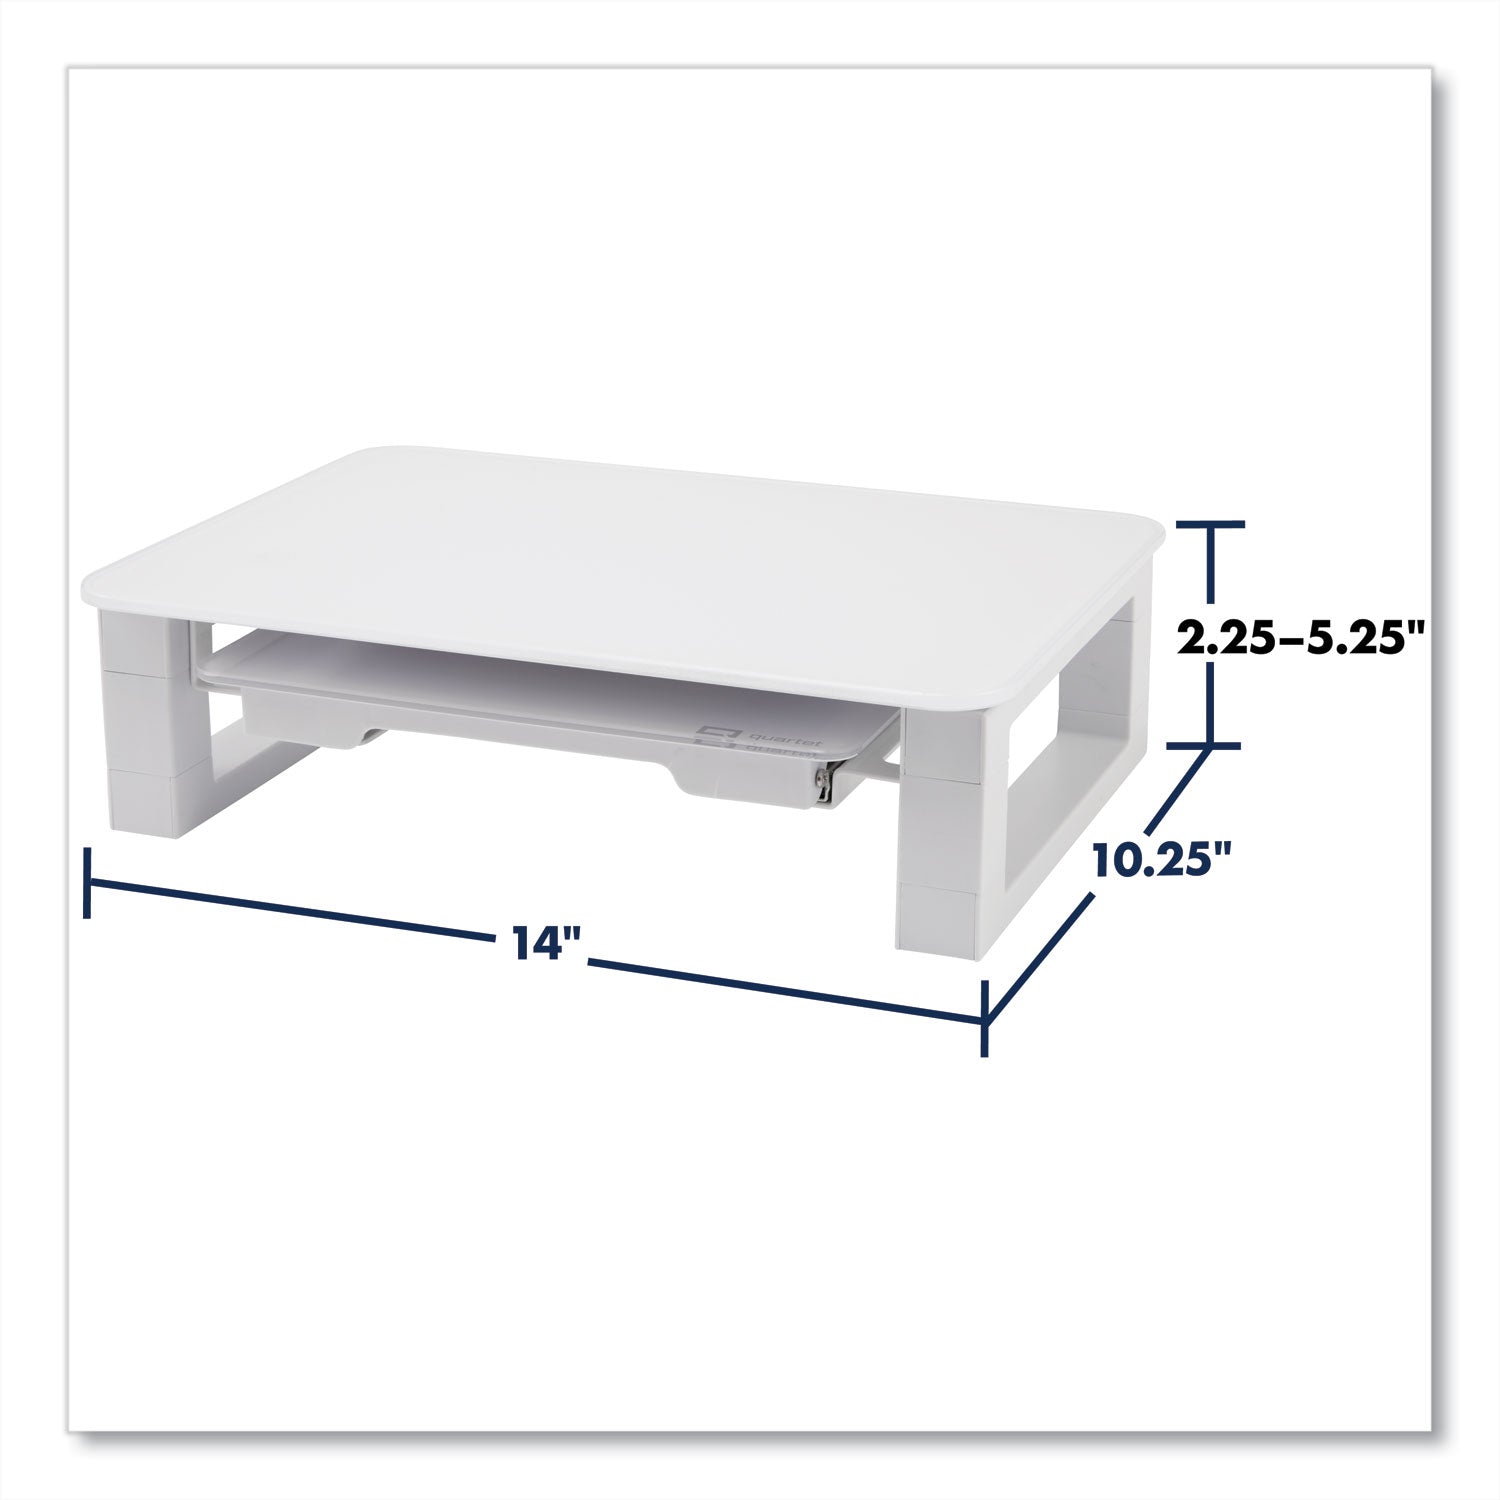 adjustable-height-desktop-glass-monitor-riser-with-dry-erase-board-14-x-1025-x-25-to-525-white-supports-100-lb_qrtq090gmrw01 - 2